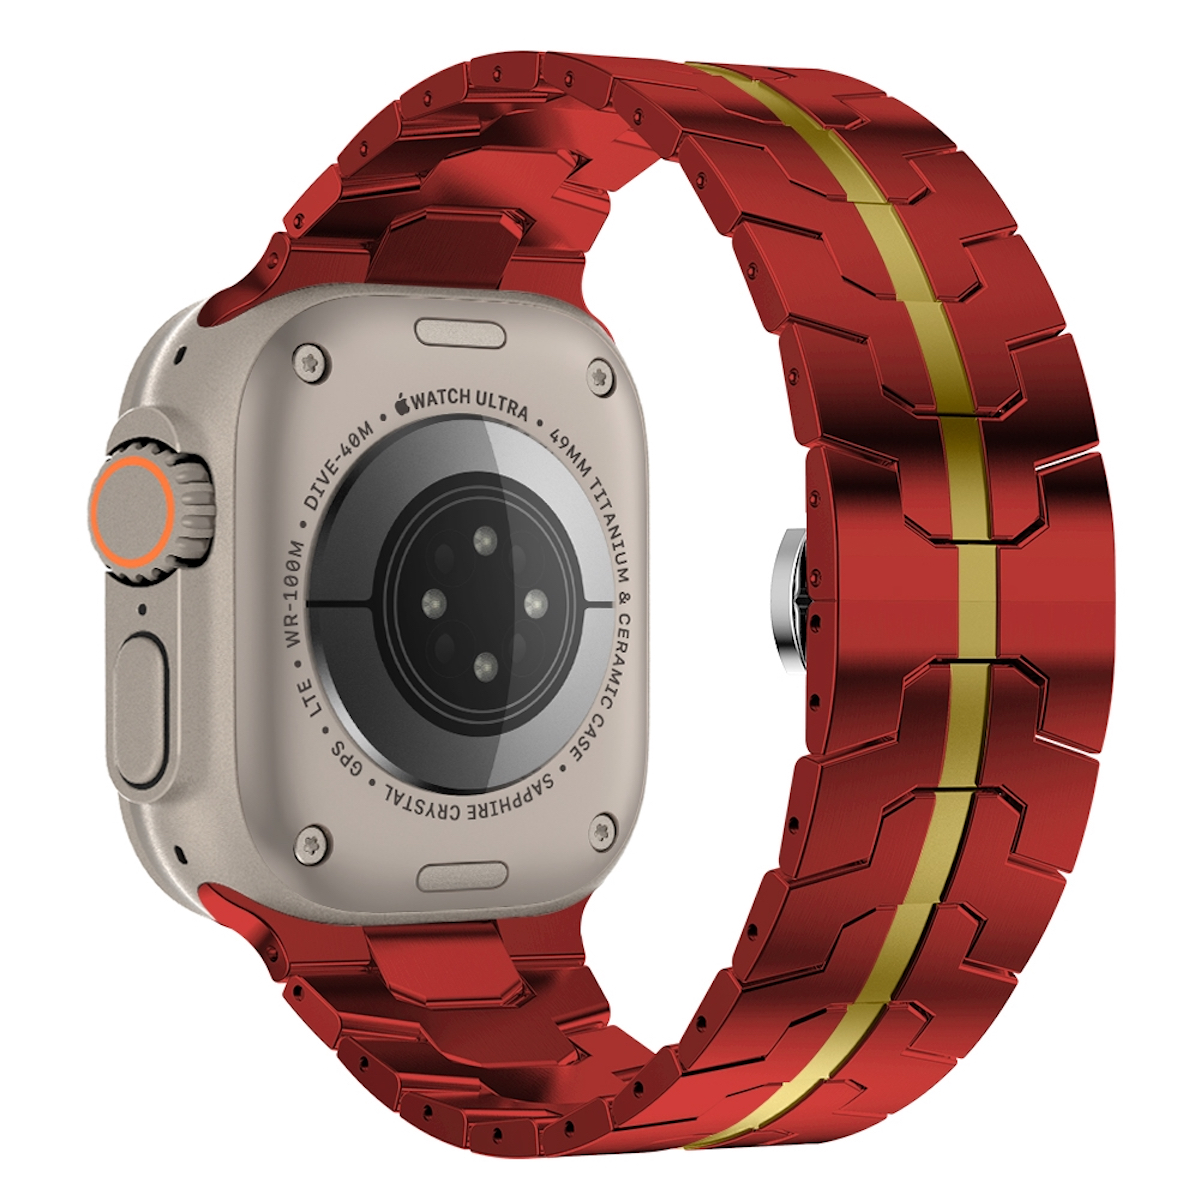 WIGENTO Deluxe 3 4 7 5 2 Apple, 2 Series Ersatzarmband, Gold 42mm, SE / / 6 Rot 9 45 Stahl 1 / 1 8 Ultra Band, Watch 49mm 44 